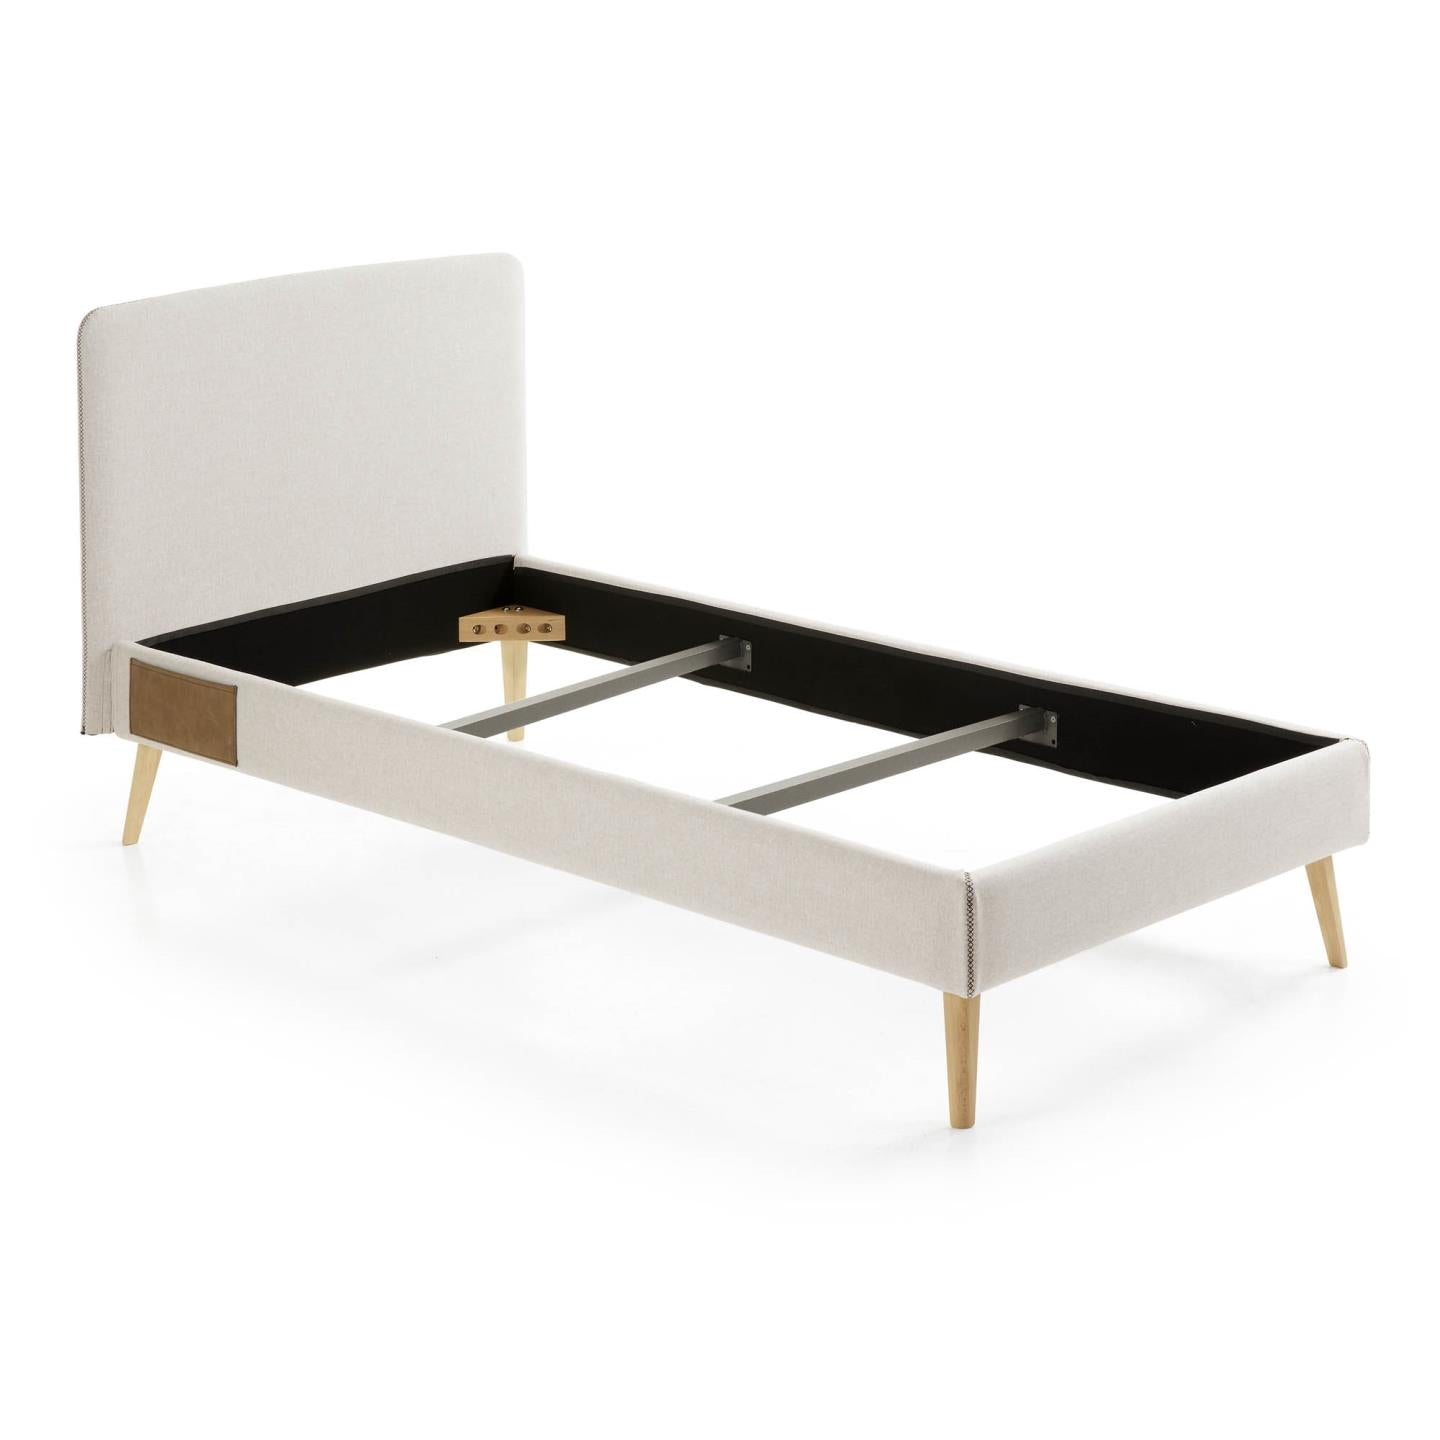 Dyla bed with removable cover in beige, with solid beech wood legs for a 90 x 190 cm mattress